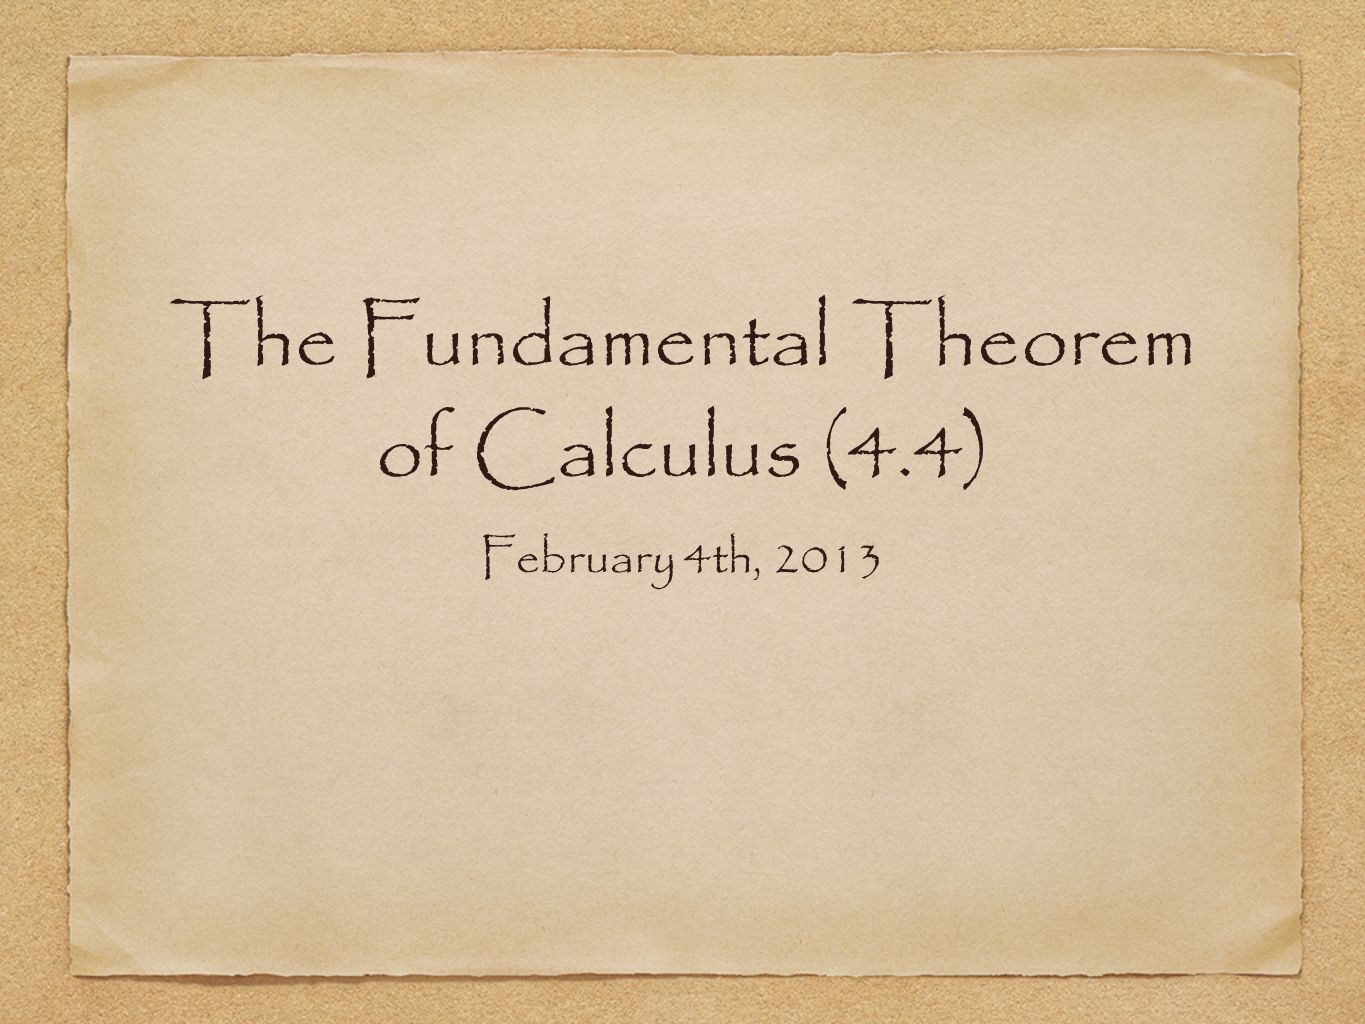 The Fundamental Theorem of Calculus (4.4) February 4th, 2013